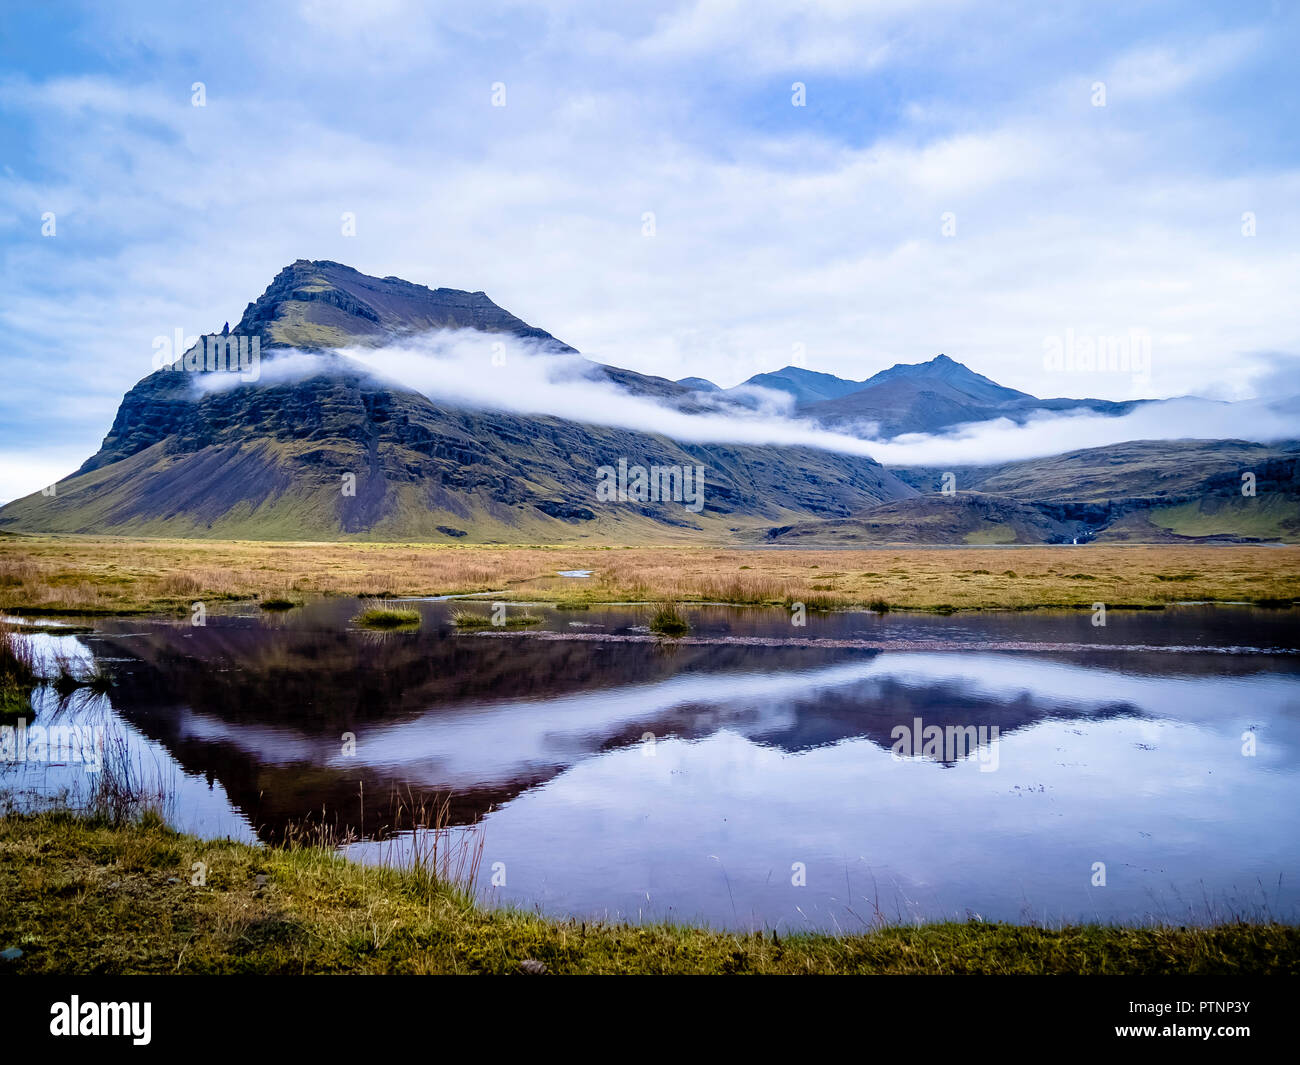 Dramatic scenery at the countryside of Iceland Stock Photo